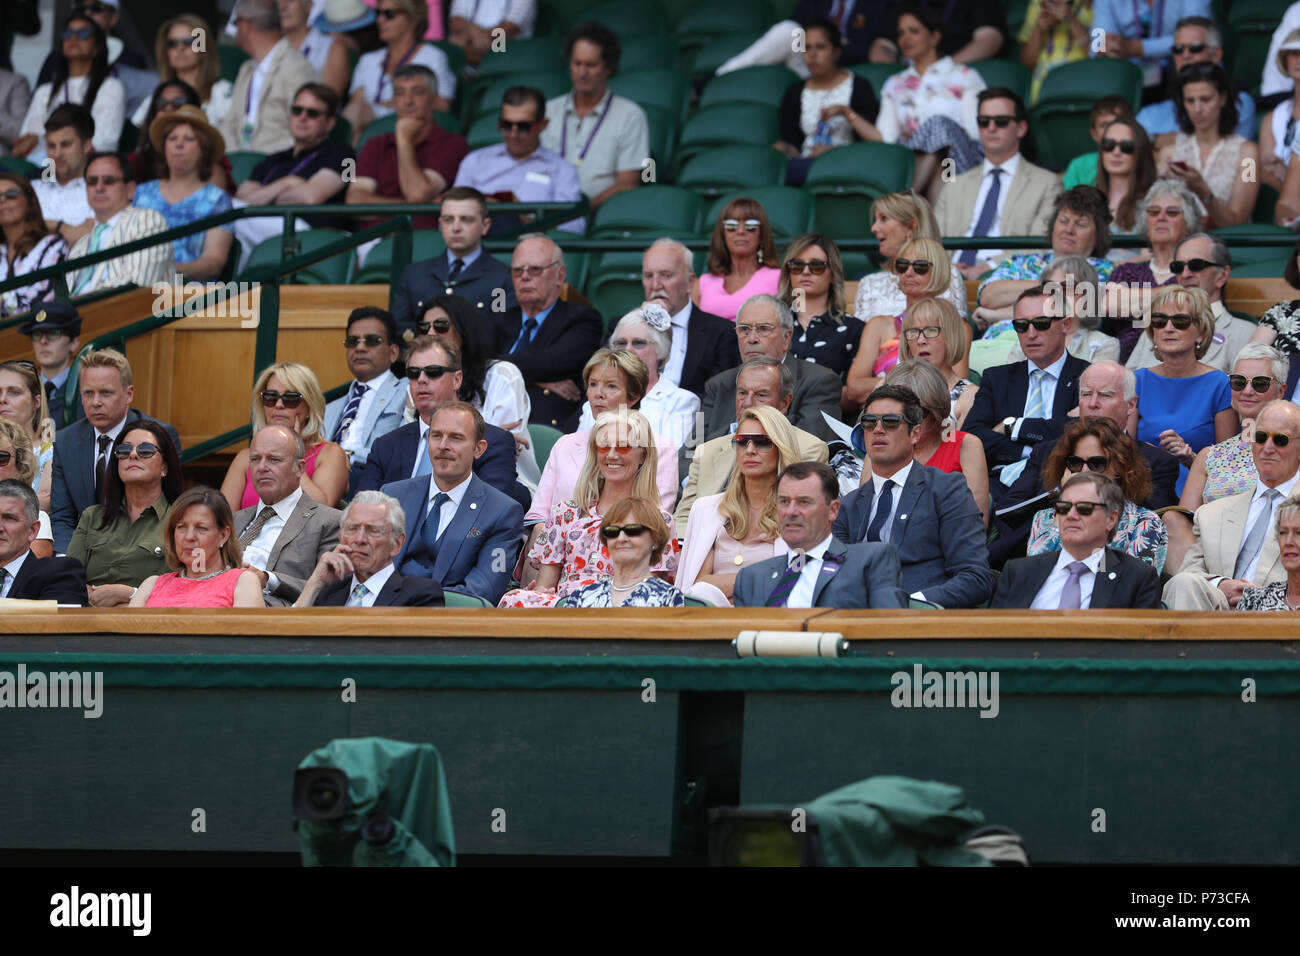 LONDON, ENGLAND - JULY 03: Carlo Nero and Joely Richardson, Vernon Kay and Tess Daly sit in the Royal Box as they attend day two of the Wimbledon Tennis Championships at the All England Lawn Tennis and Croquet Club on July 3, 2018 in London, England.  People:  Carlo Nero and Joely Richardson, Vernon Kay and Tess Daly Credit: Storms Media Group/Alamy Live News Stock Photo